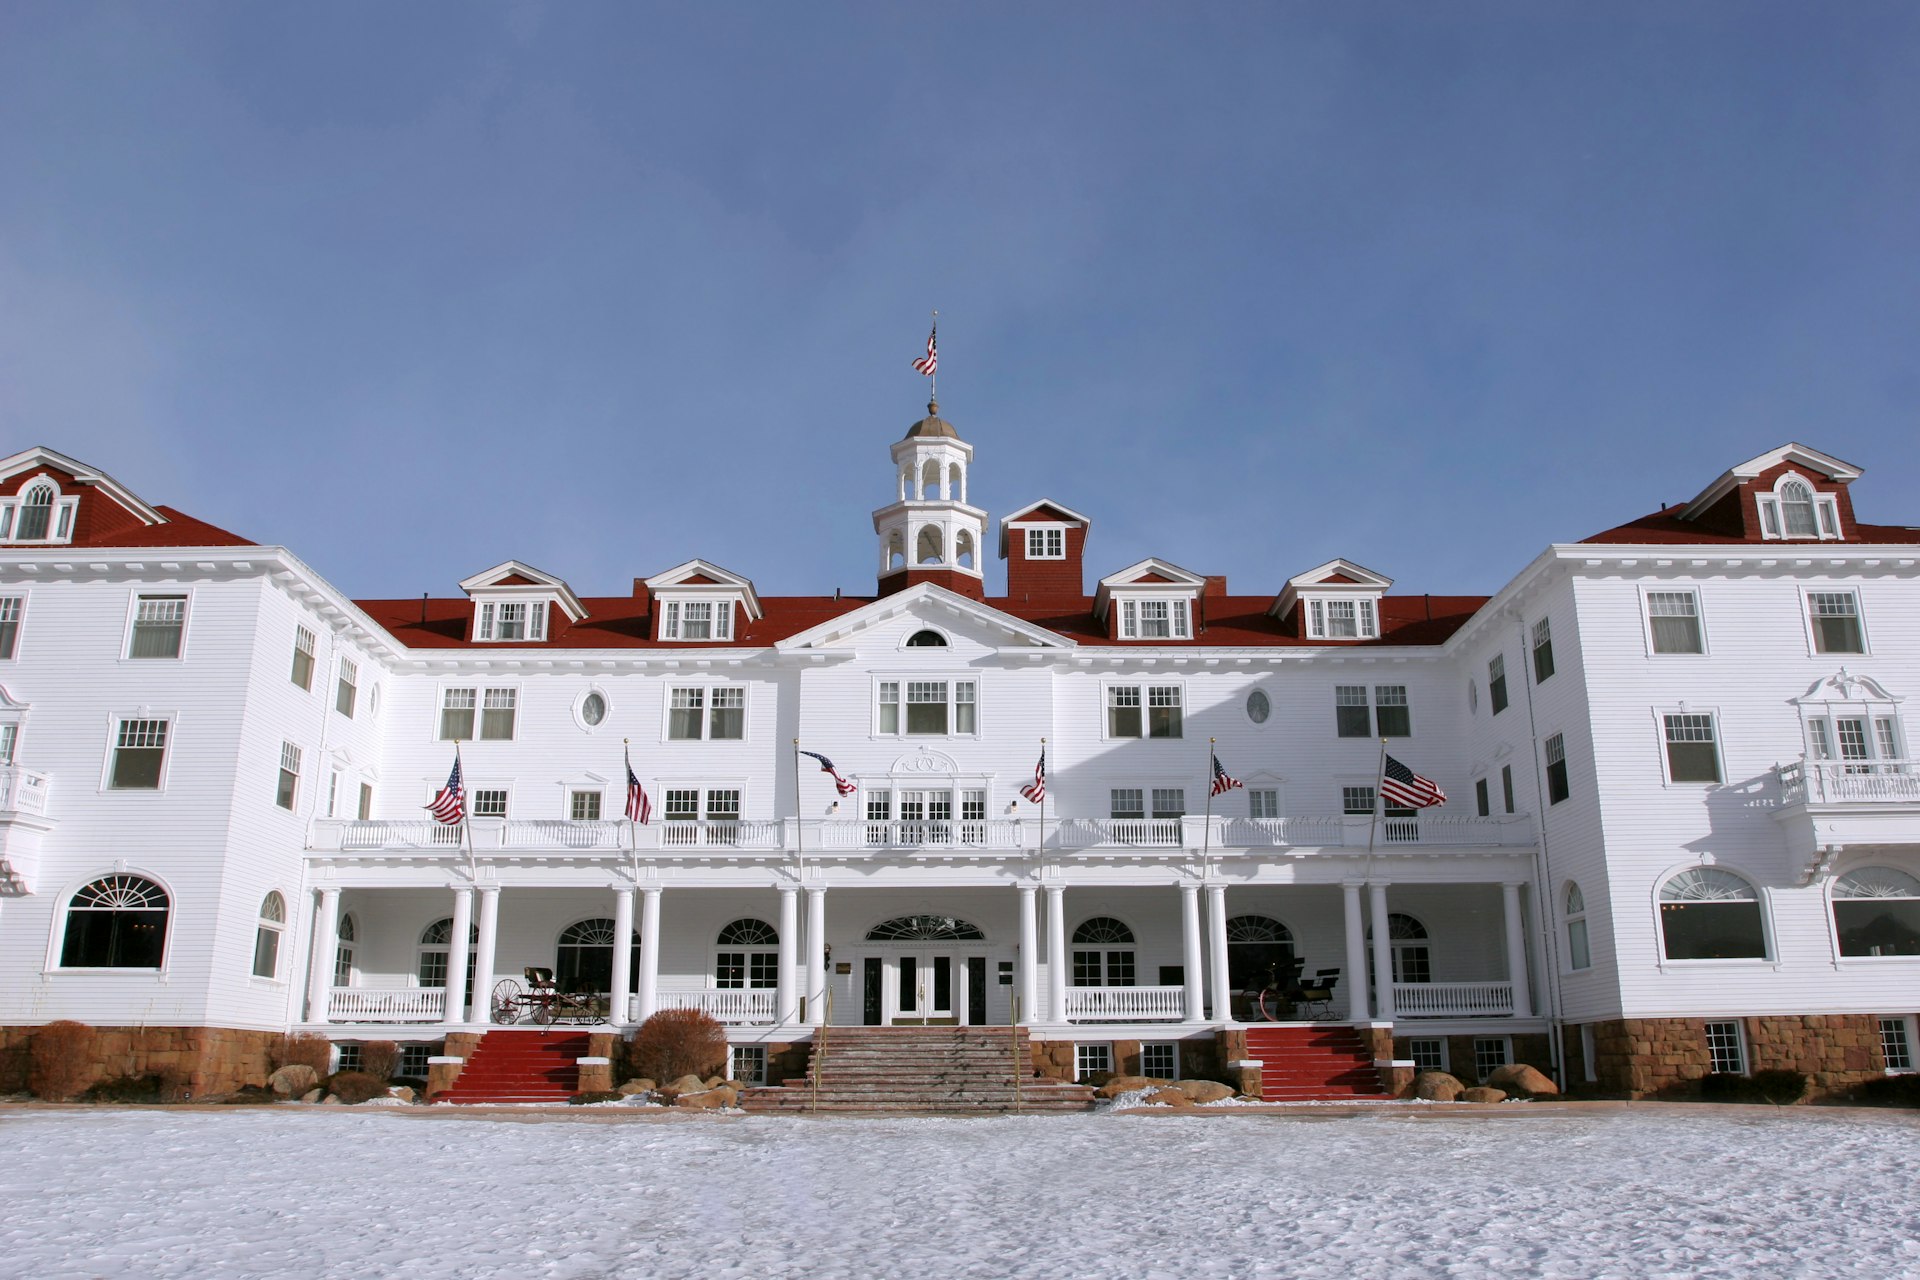 A large white hotel building with red-roof tiles and turrets